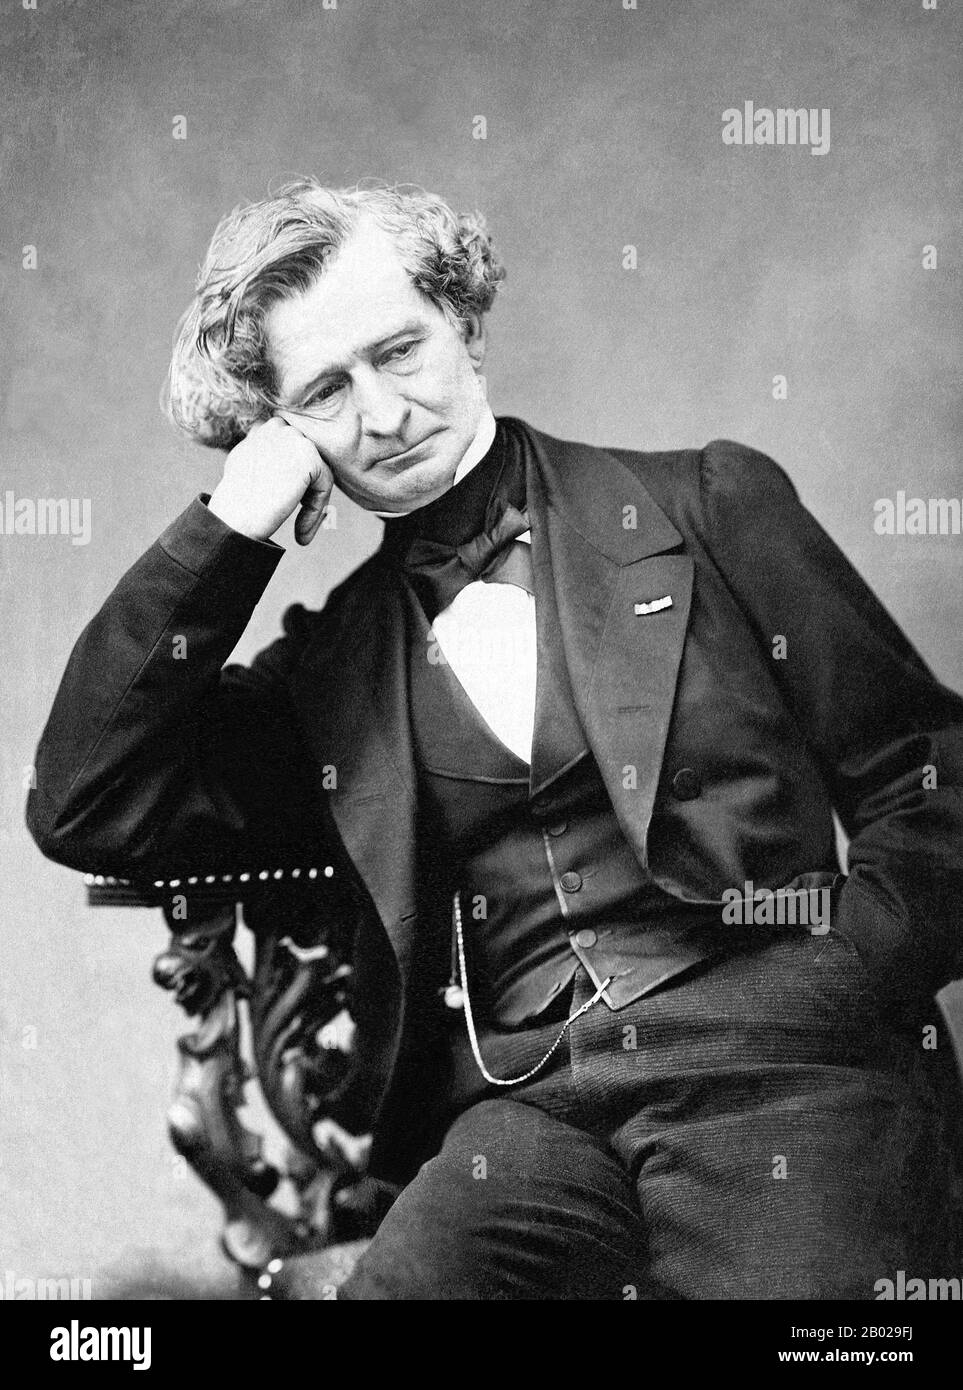 French Romantic composer Hector Berlioz was an habitual opium user. He is most famous for his orchestral work Symphonie fantastique. Symphonie fantastique is an 'opera without words'. It was first performed in 1830. Each movement is designed to evoke the different stages of the opium experience.  A sublimation of his own unrequited love for actress Harriet Smithson, Berlioz's masterpiece is about a tormented lovesick artist who takes an overdose of opium. Instead of killing him, the opium induces astonishing dream imagery. Stock Photo